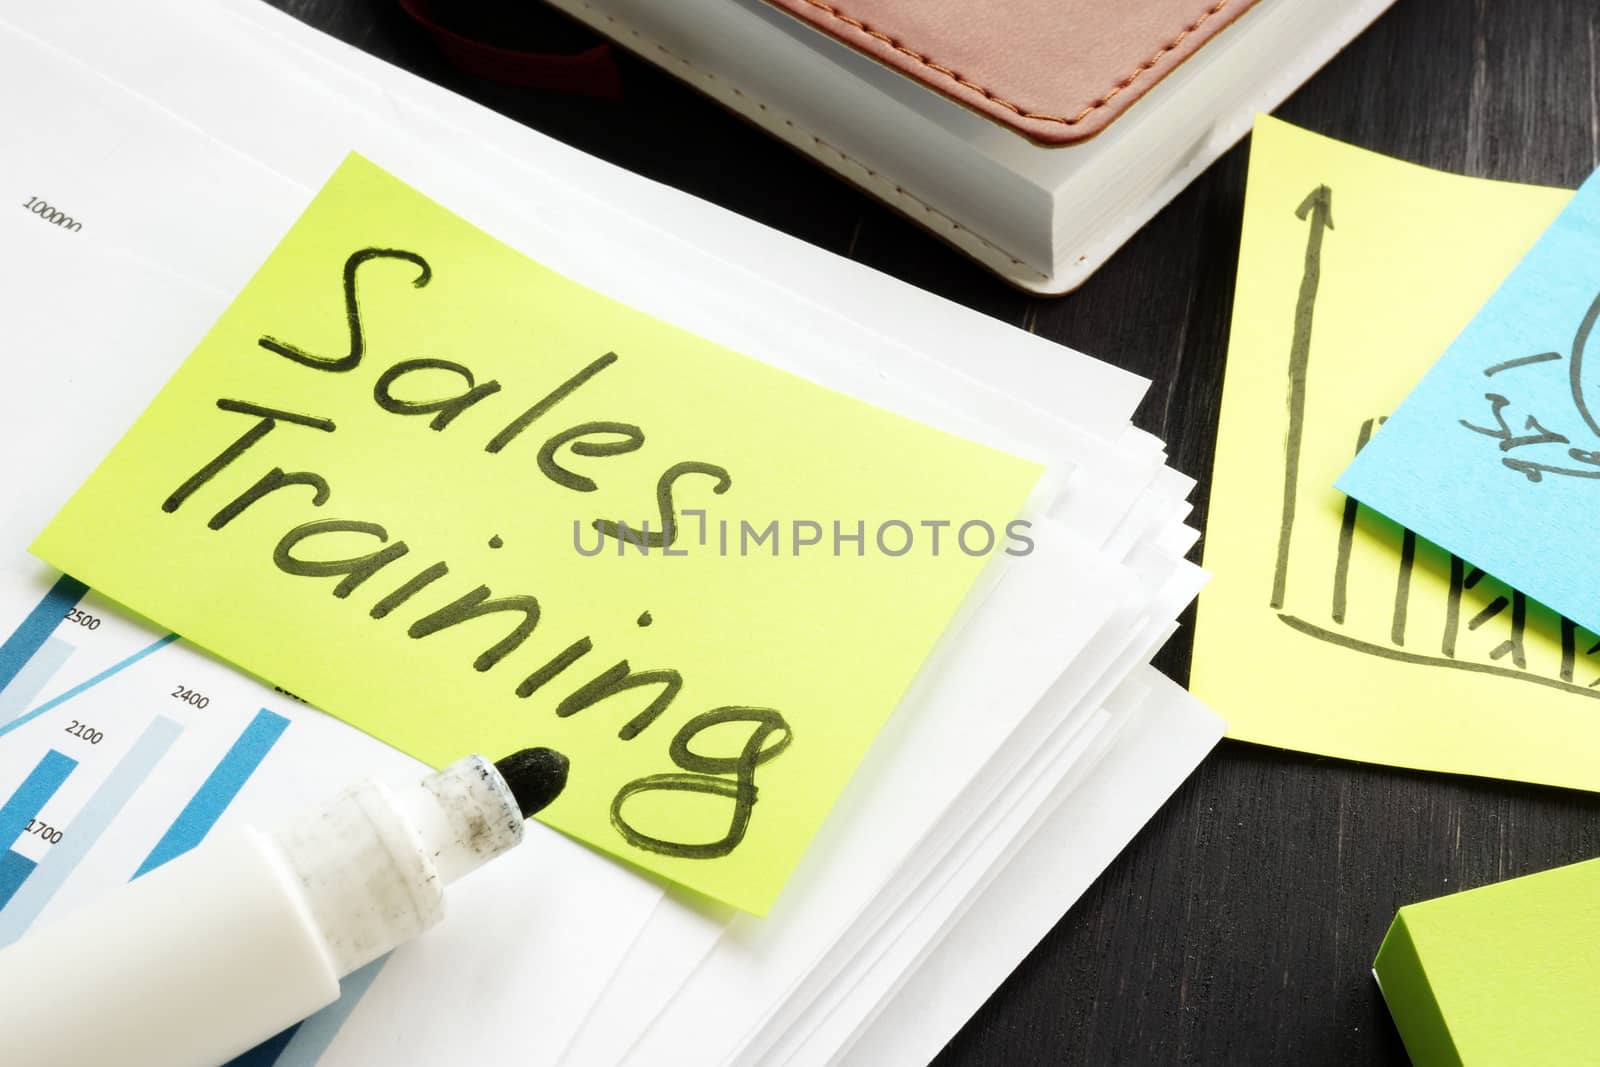 Sales training sign and business report with charts.